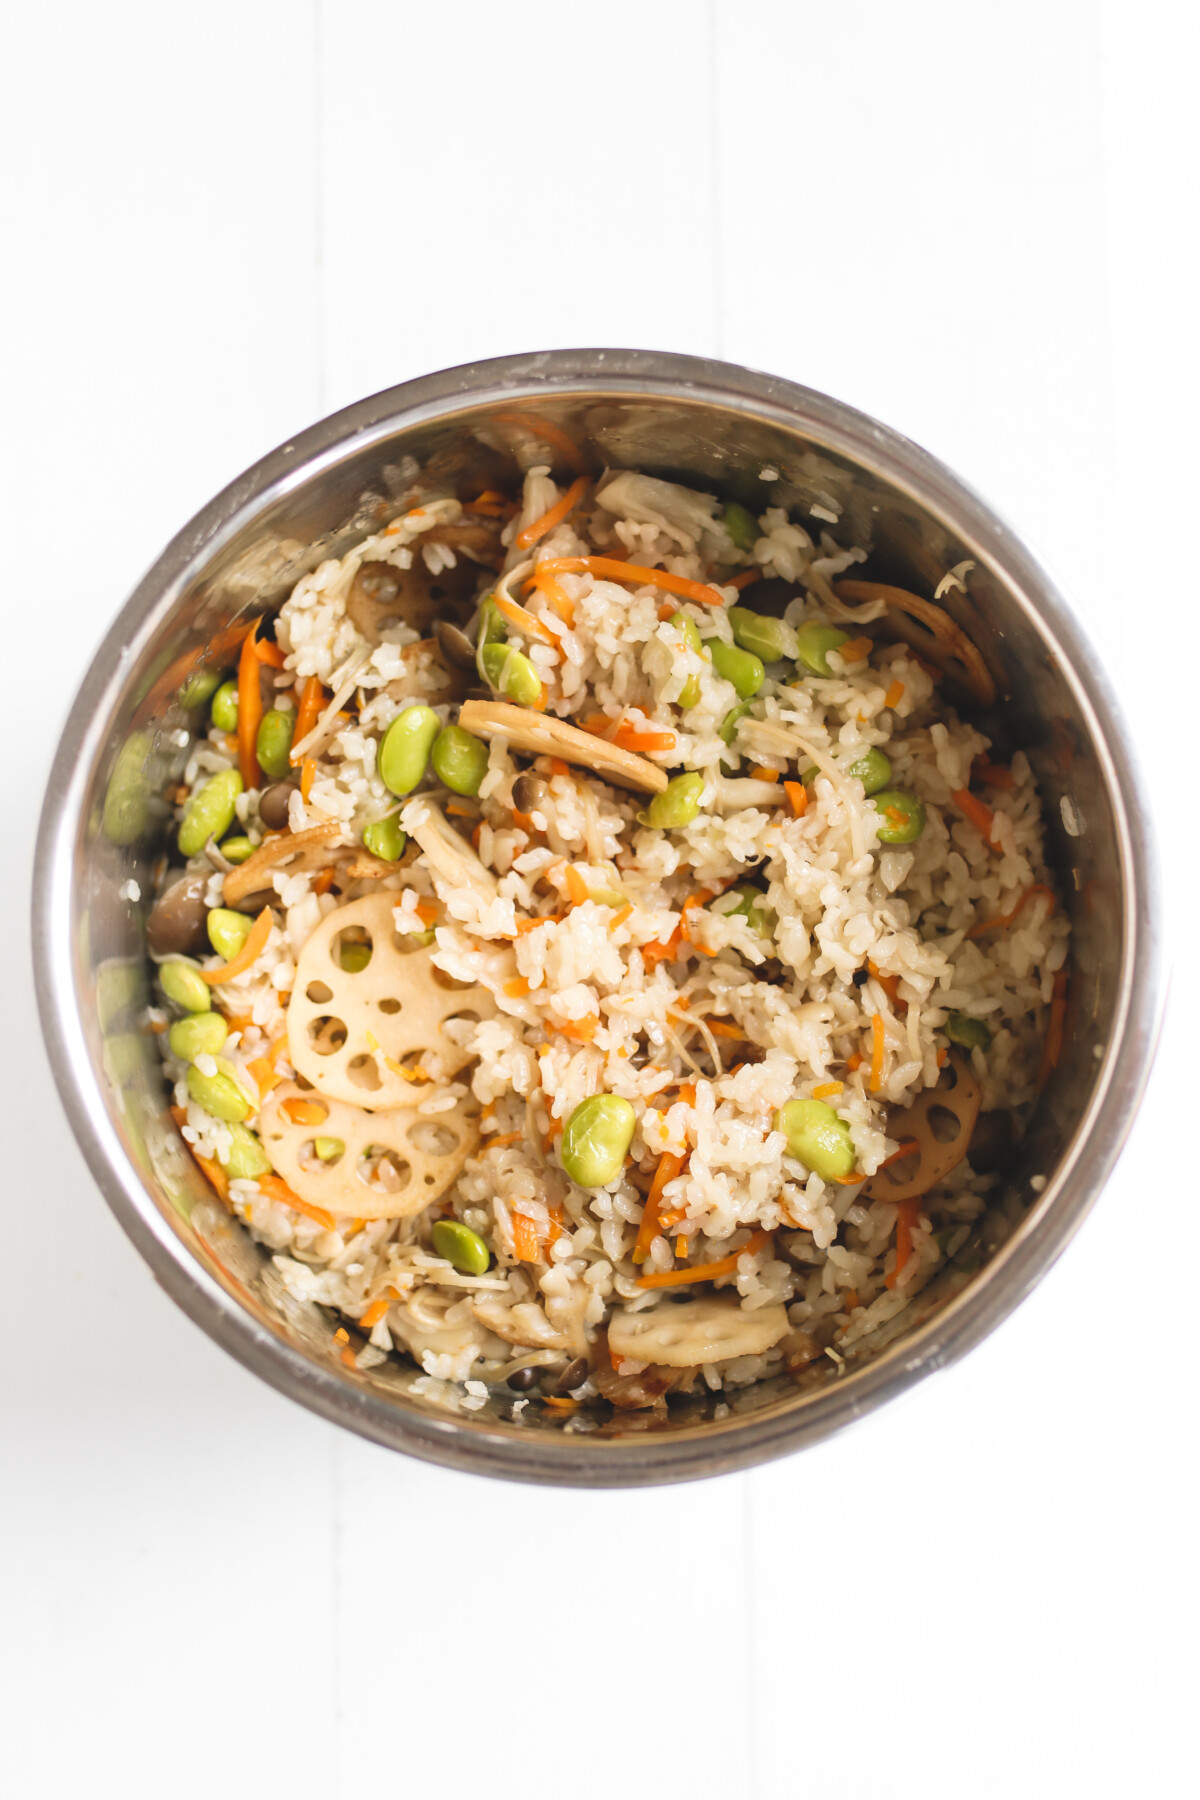 the finished product of mixed rice cooking in an instant pot